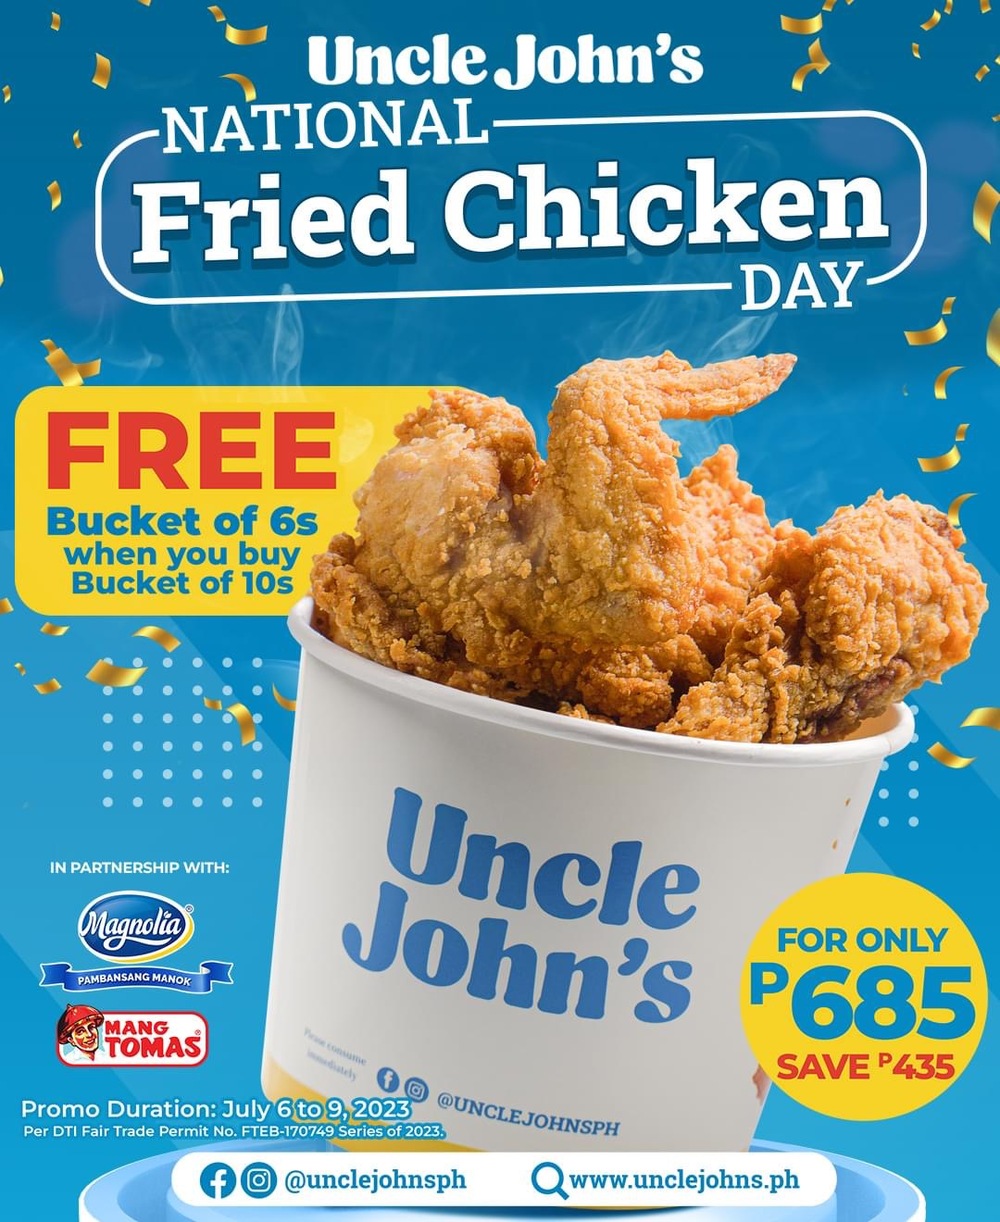 Awesome chicken deals and promos this National Fried Chicken Day 2023 from Uncle John's